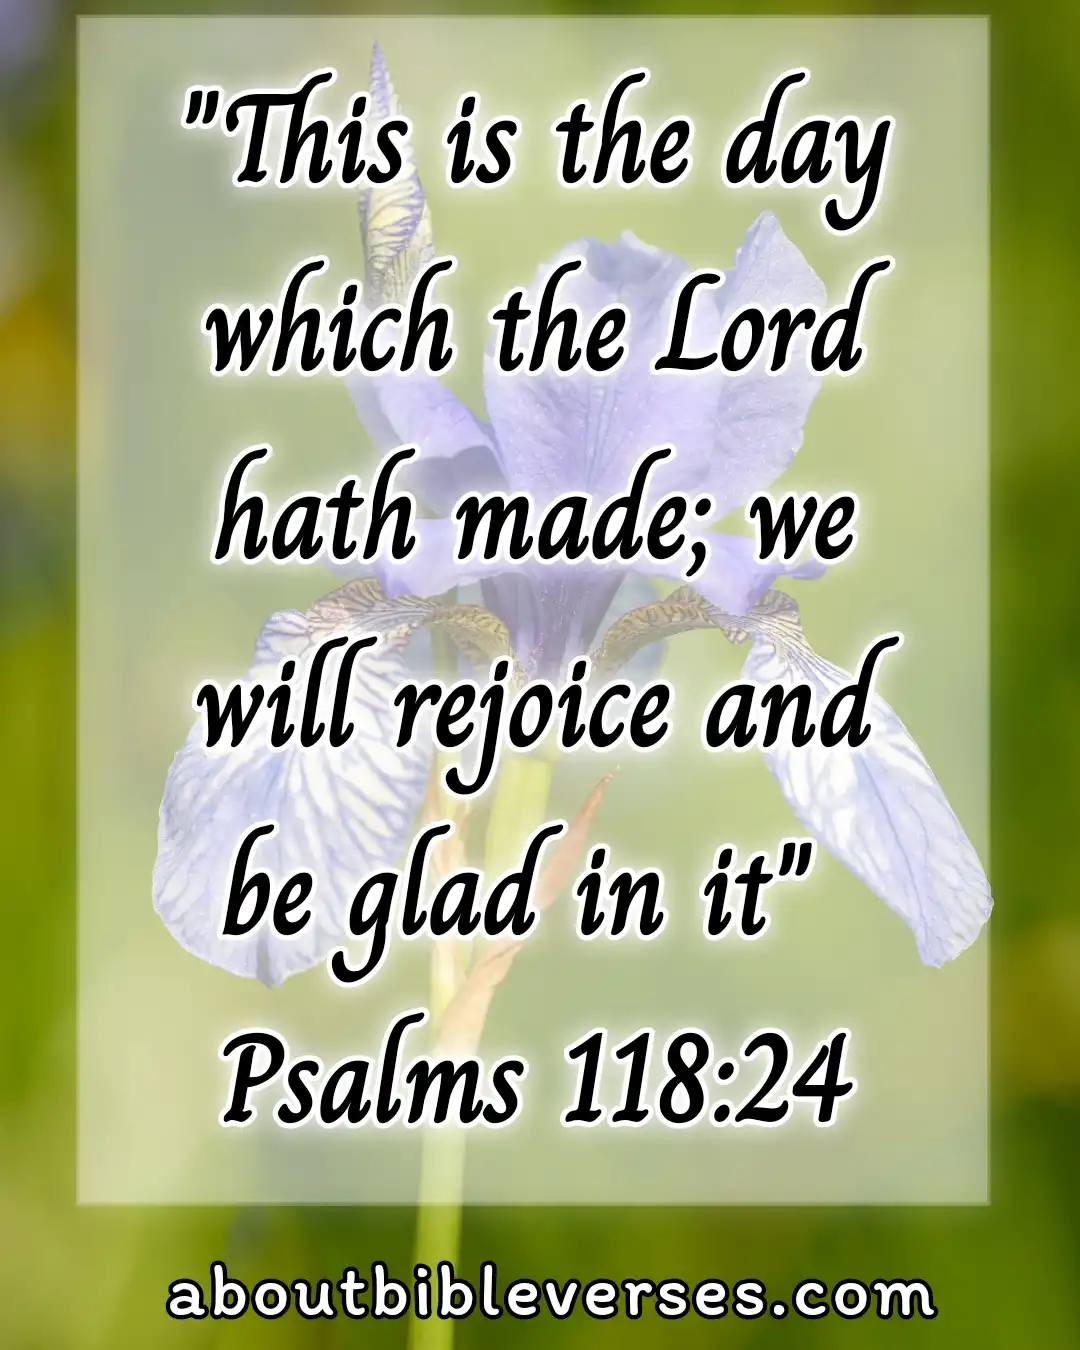 Today bible verse (Psalm 118:24)